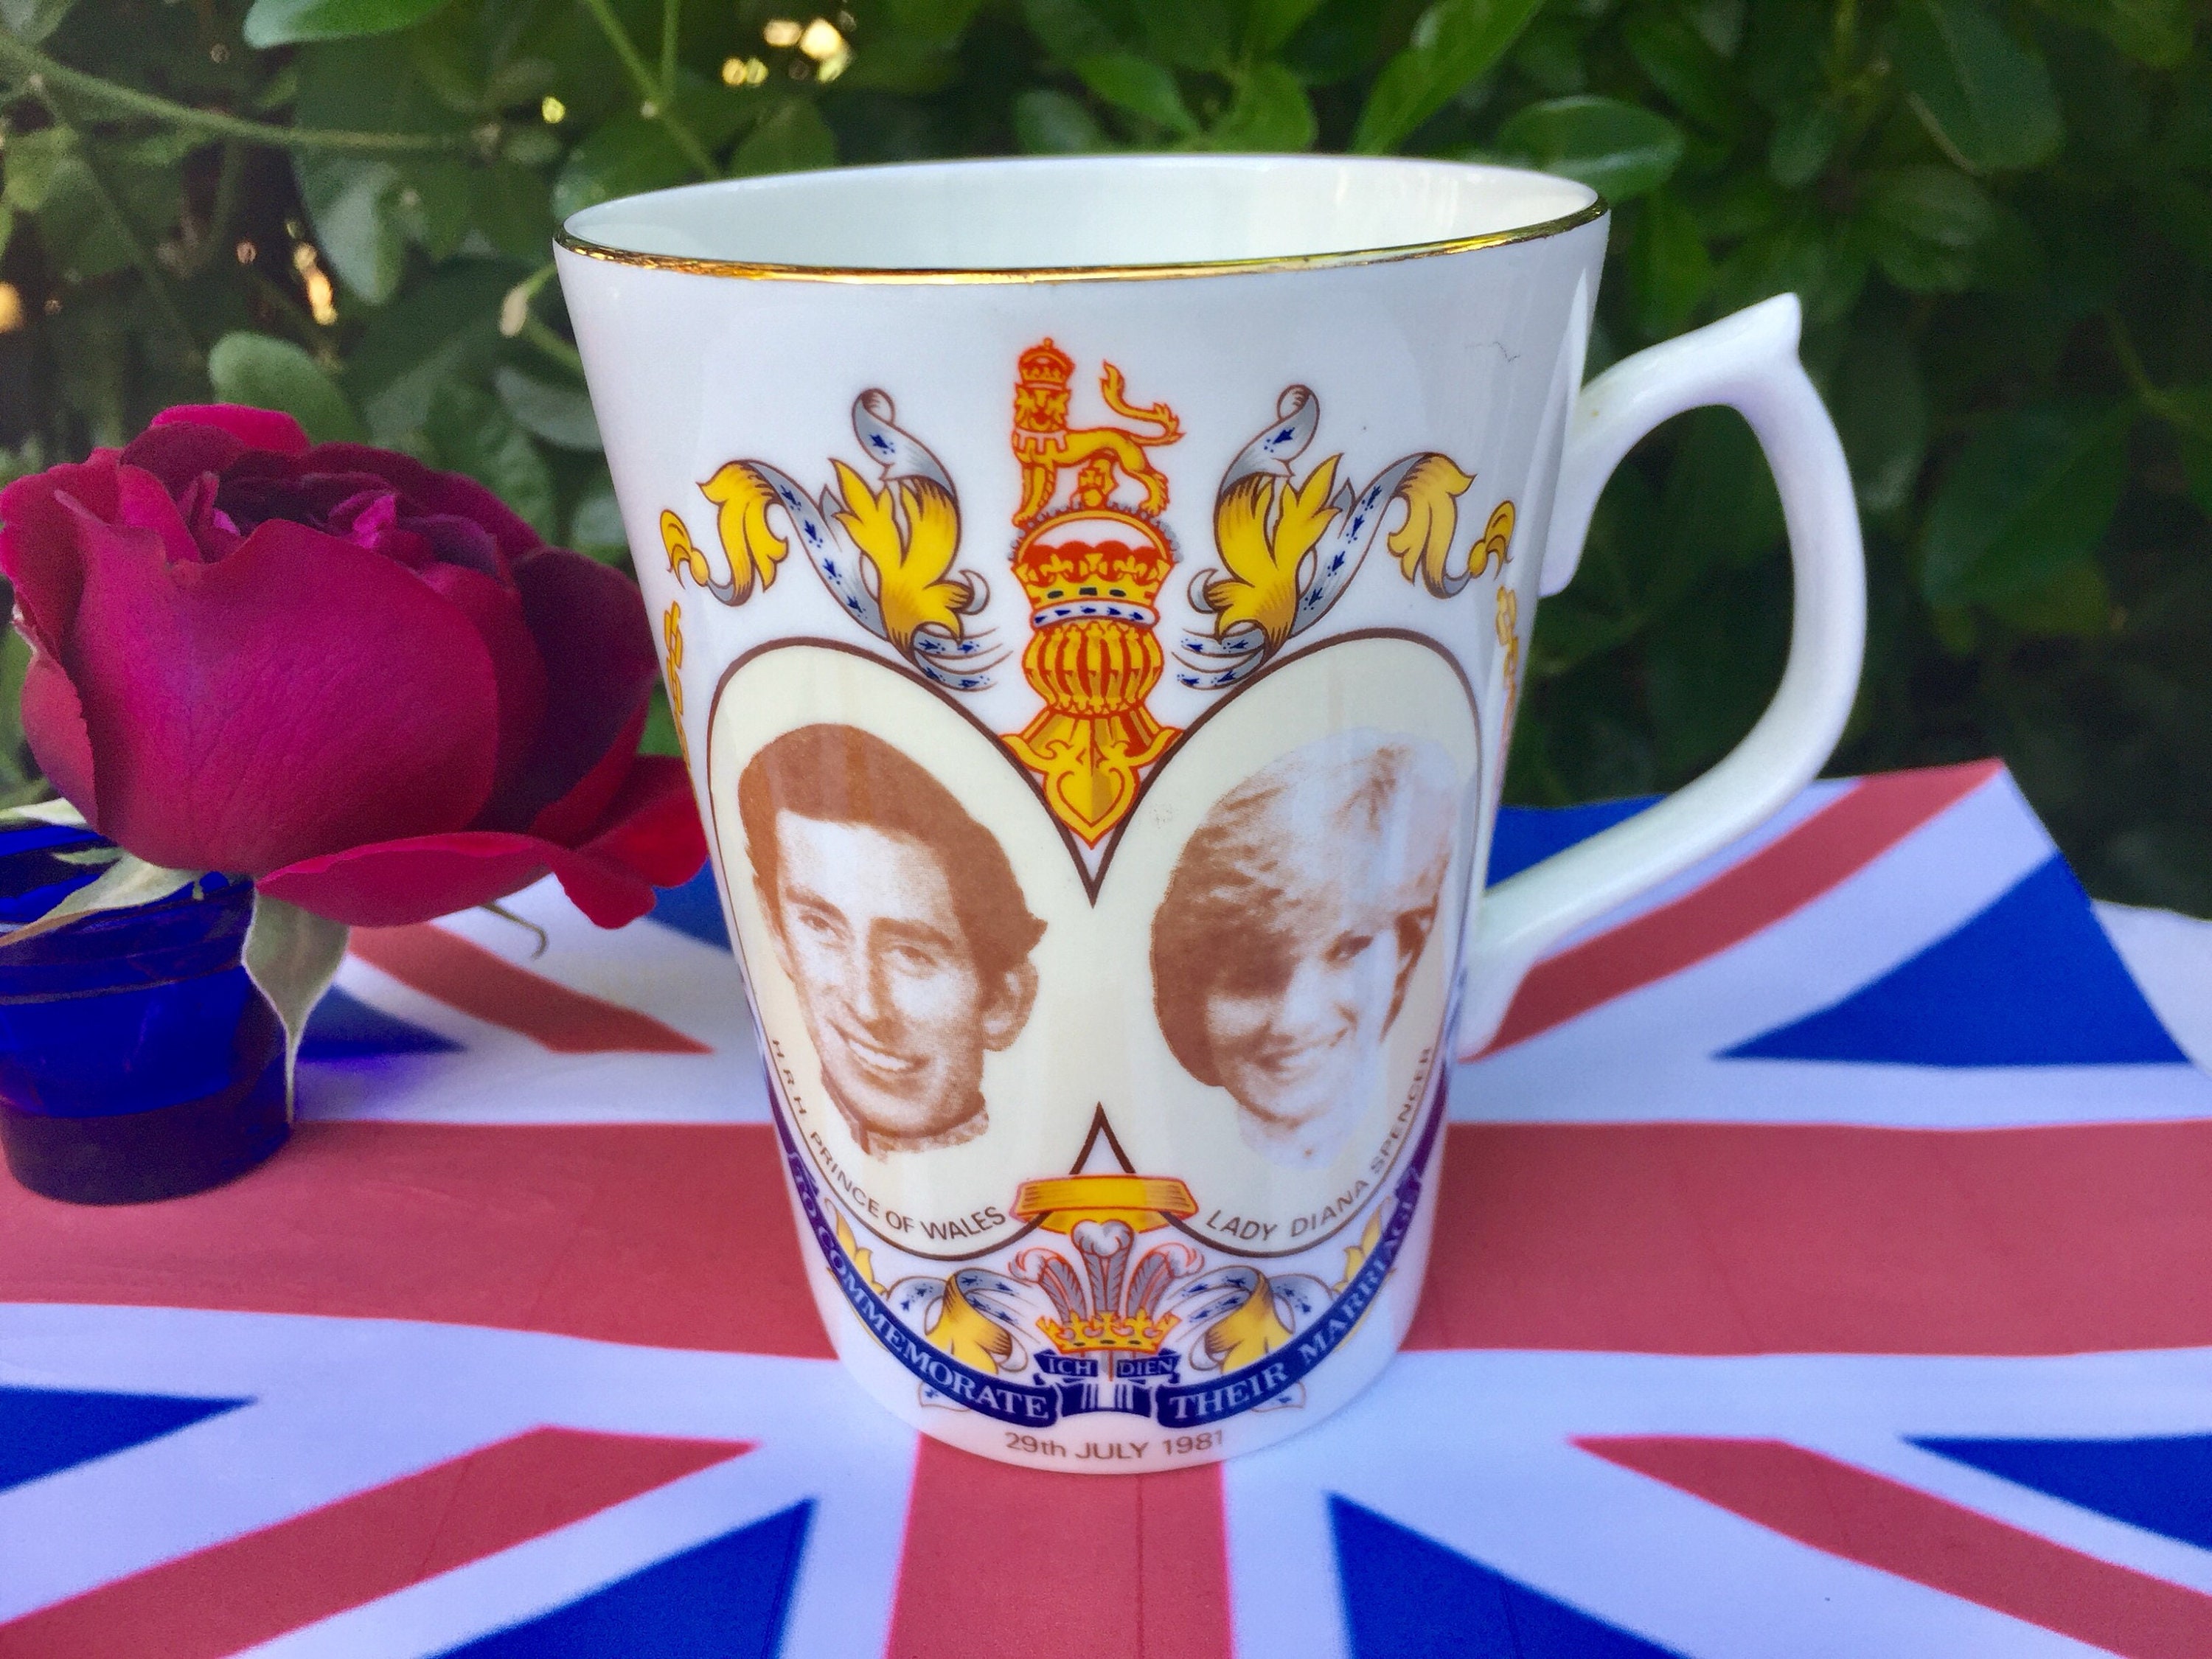 PRINCE OF WALES & LADY DIANA 1981 COBALT BLUE CUP PLATE   PRICE  REDUCED 